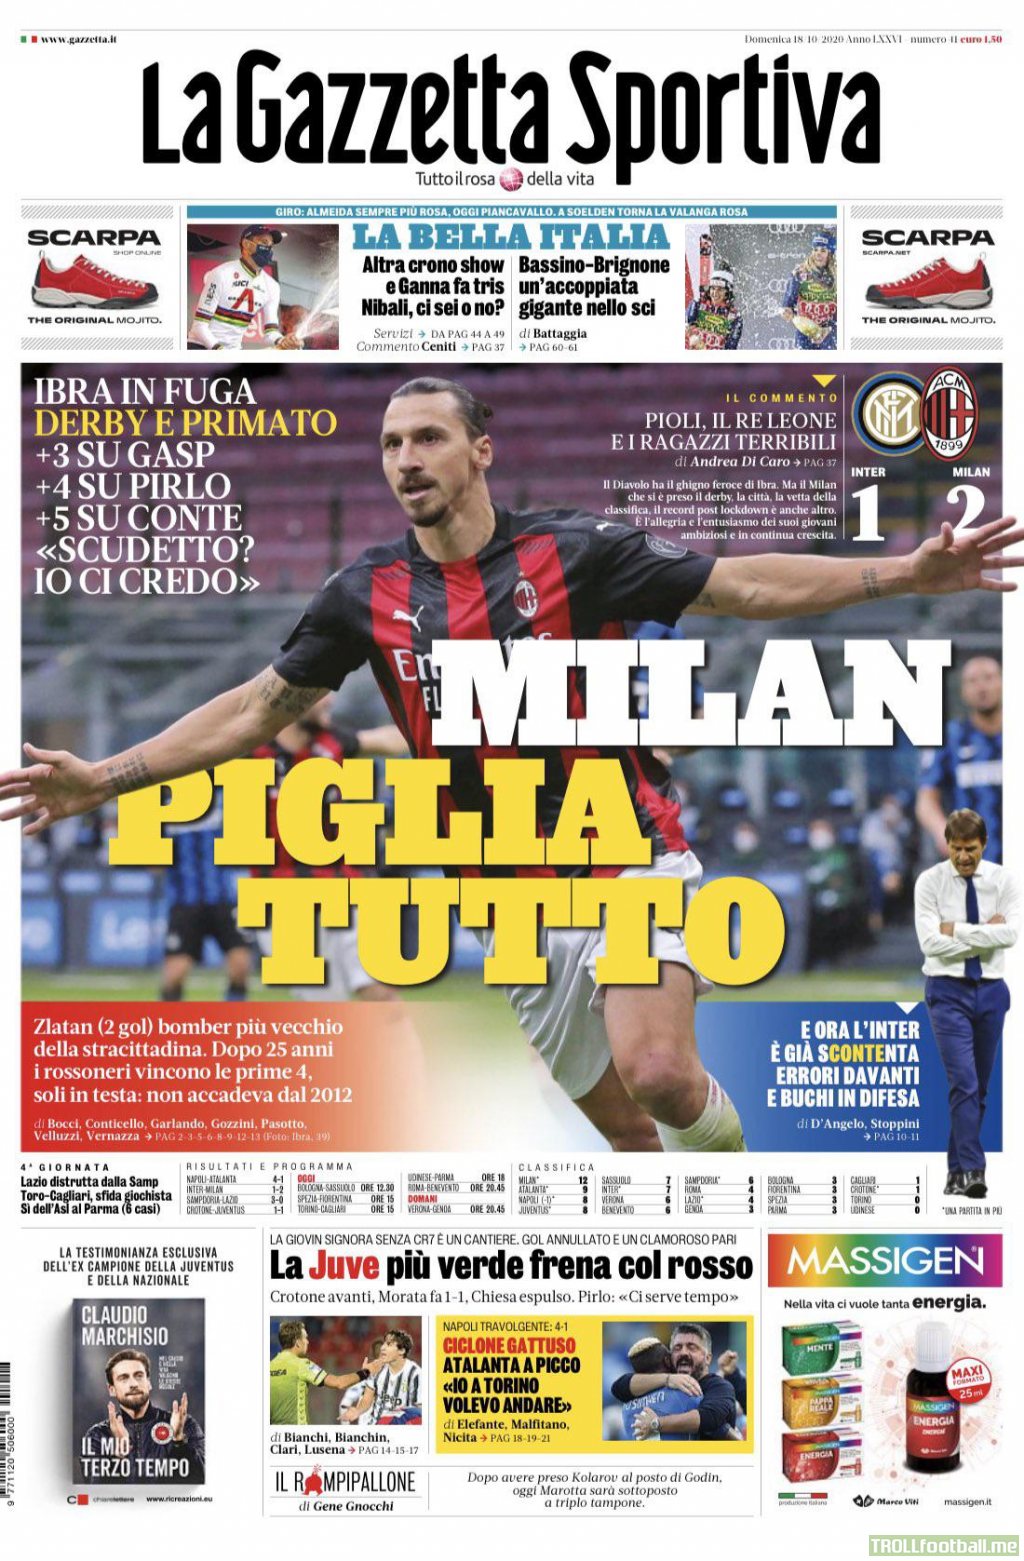 Milan takes everything, Milan win the derby & top the table, +3 from Gasp,+4 from Pirlo, +5 from Conte